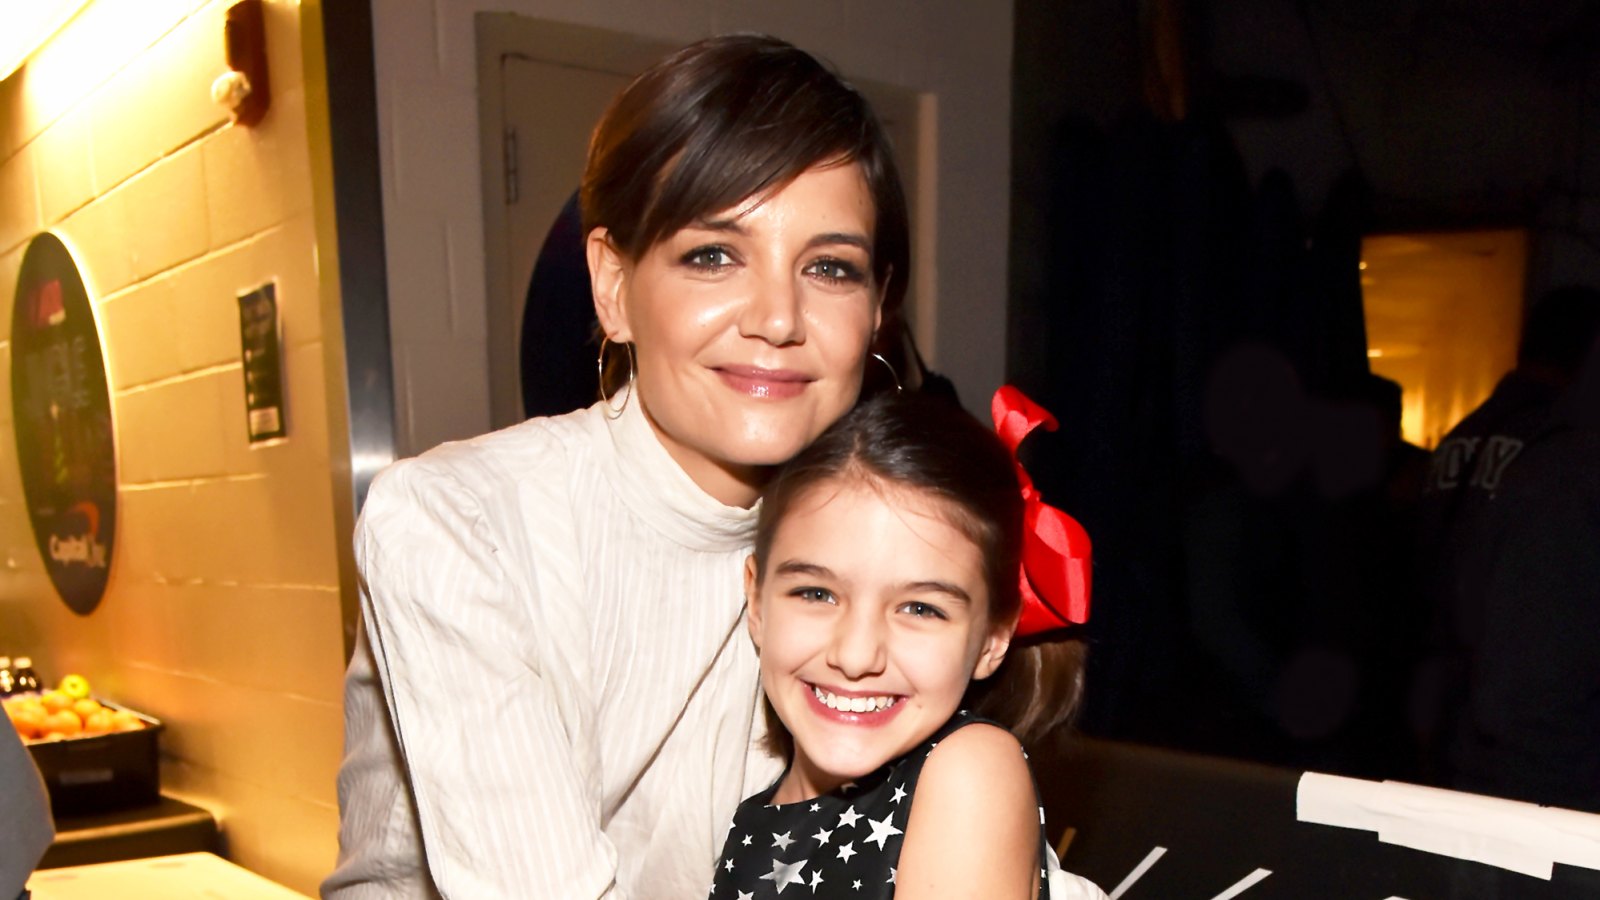 Katie Holmes and Suri Cruise attend the Z100's Jingle Ball 2017 in New York City.